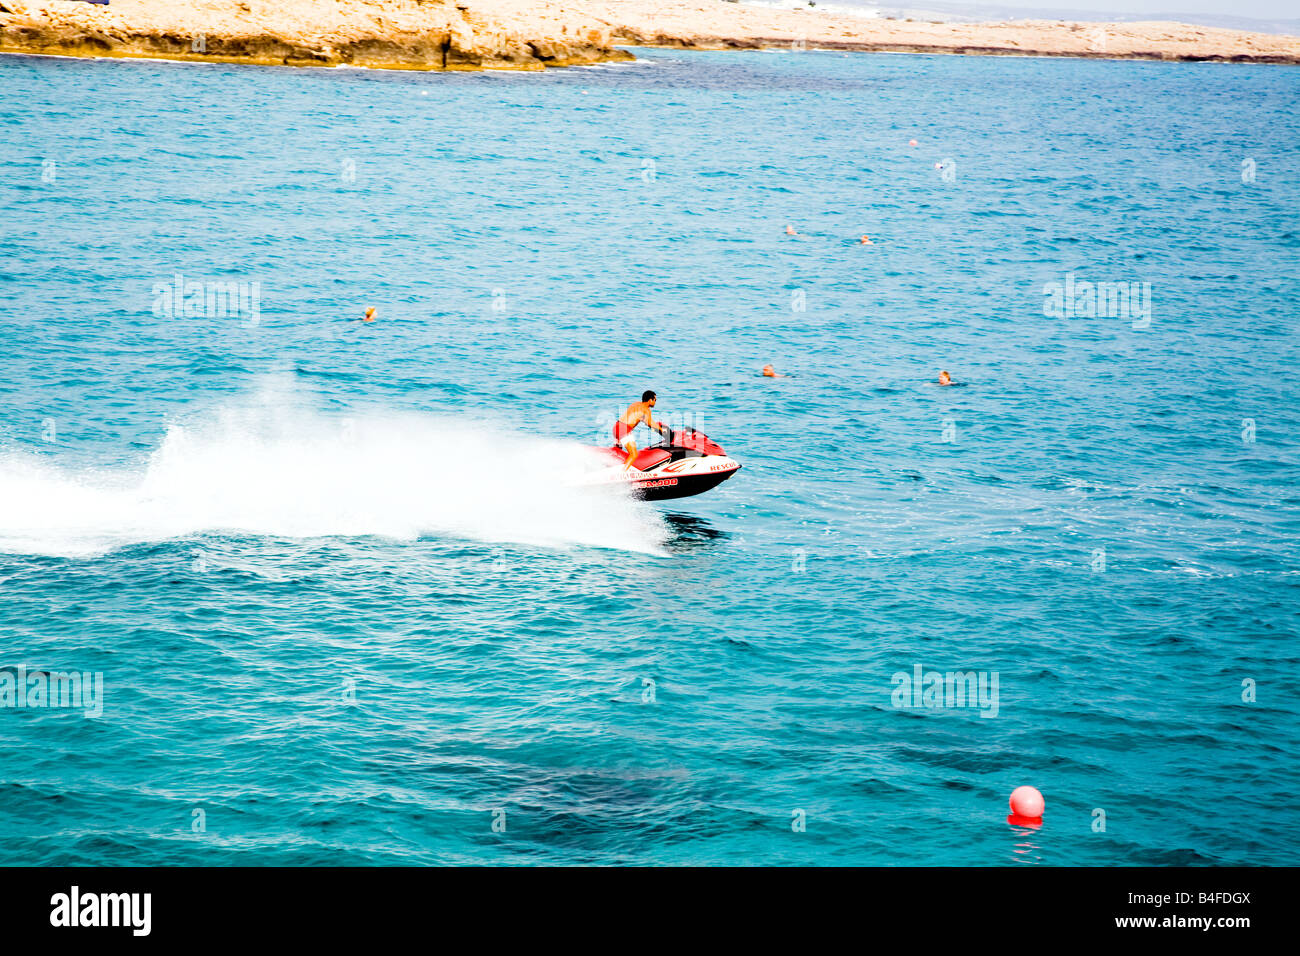 A rescue jet ski patrolling the waters off Nissi beach, Cyprus, with swimmers in the water Stock Photo